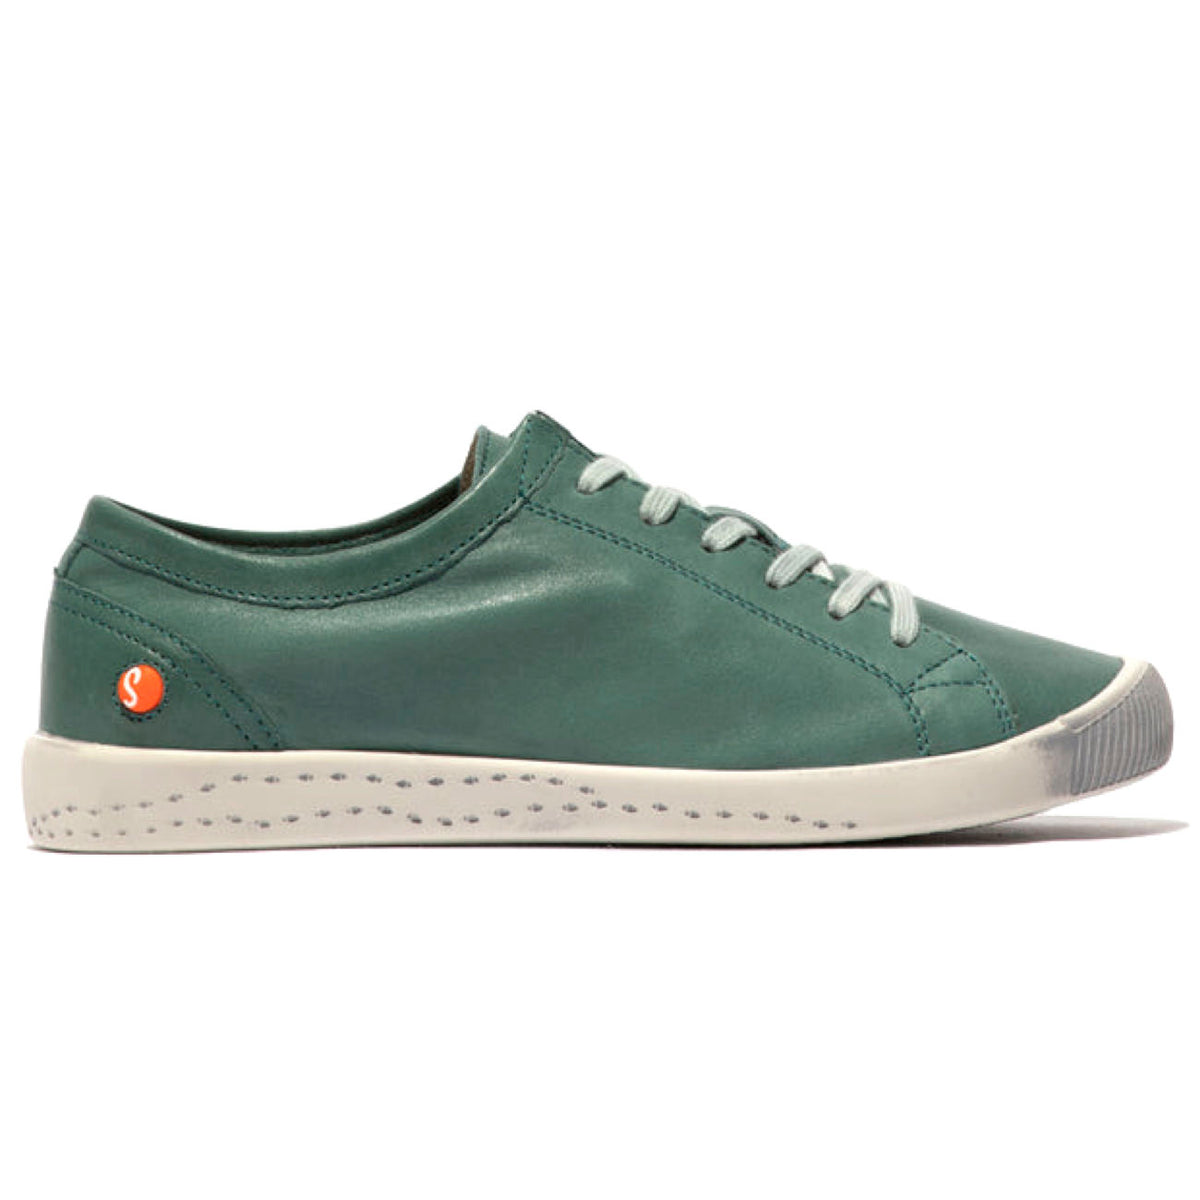 Softinos, Isla154, Laceup Shoe, Washed Leather, Green